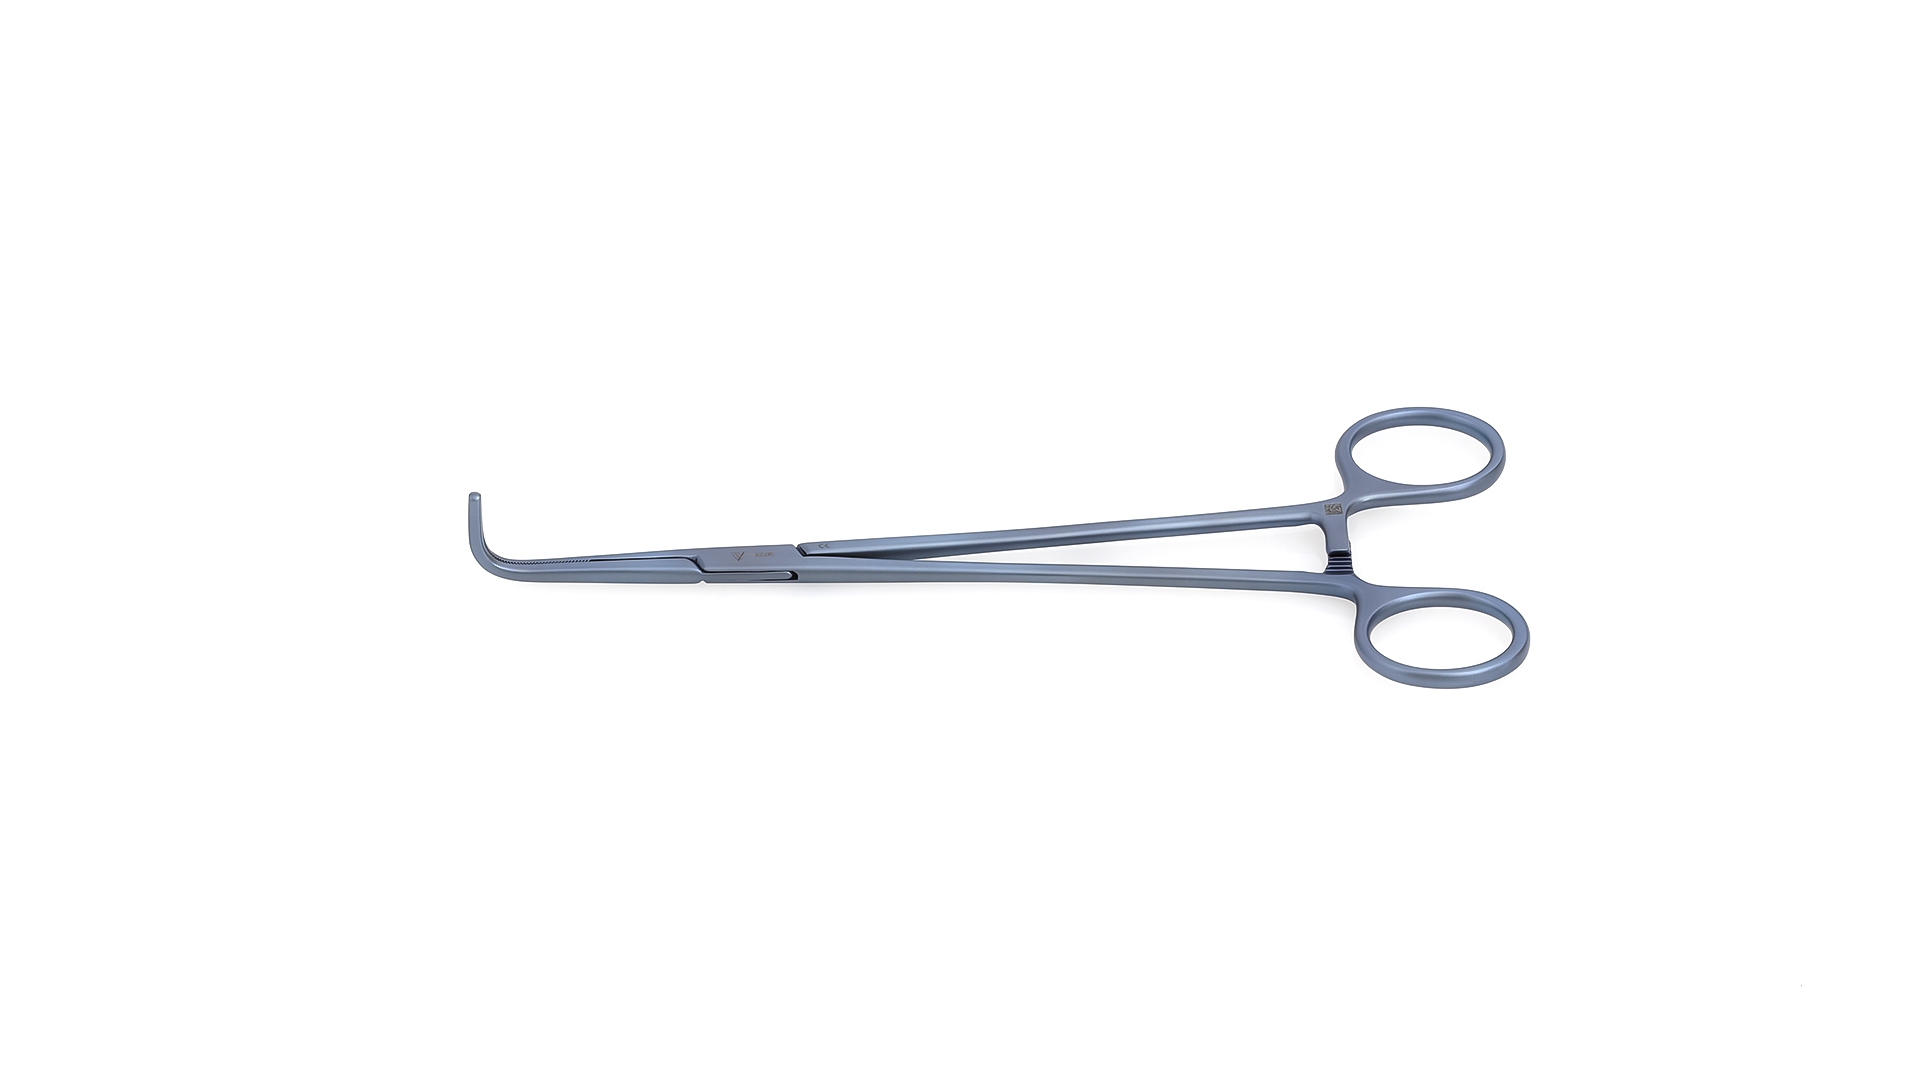 O'Shaughnessy Forceps - Curved serrated jaws